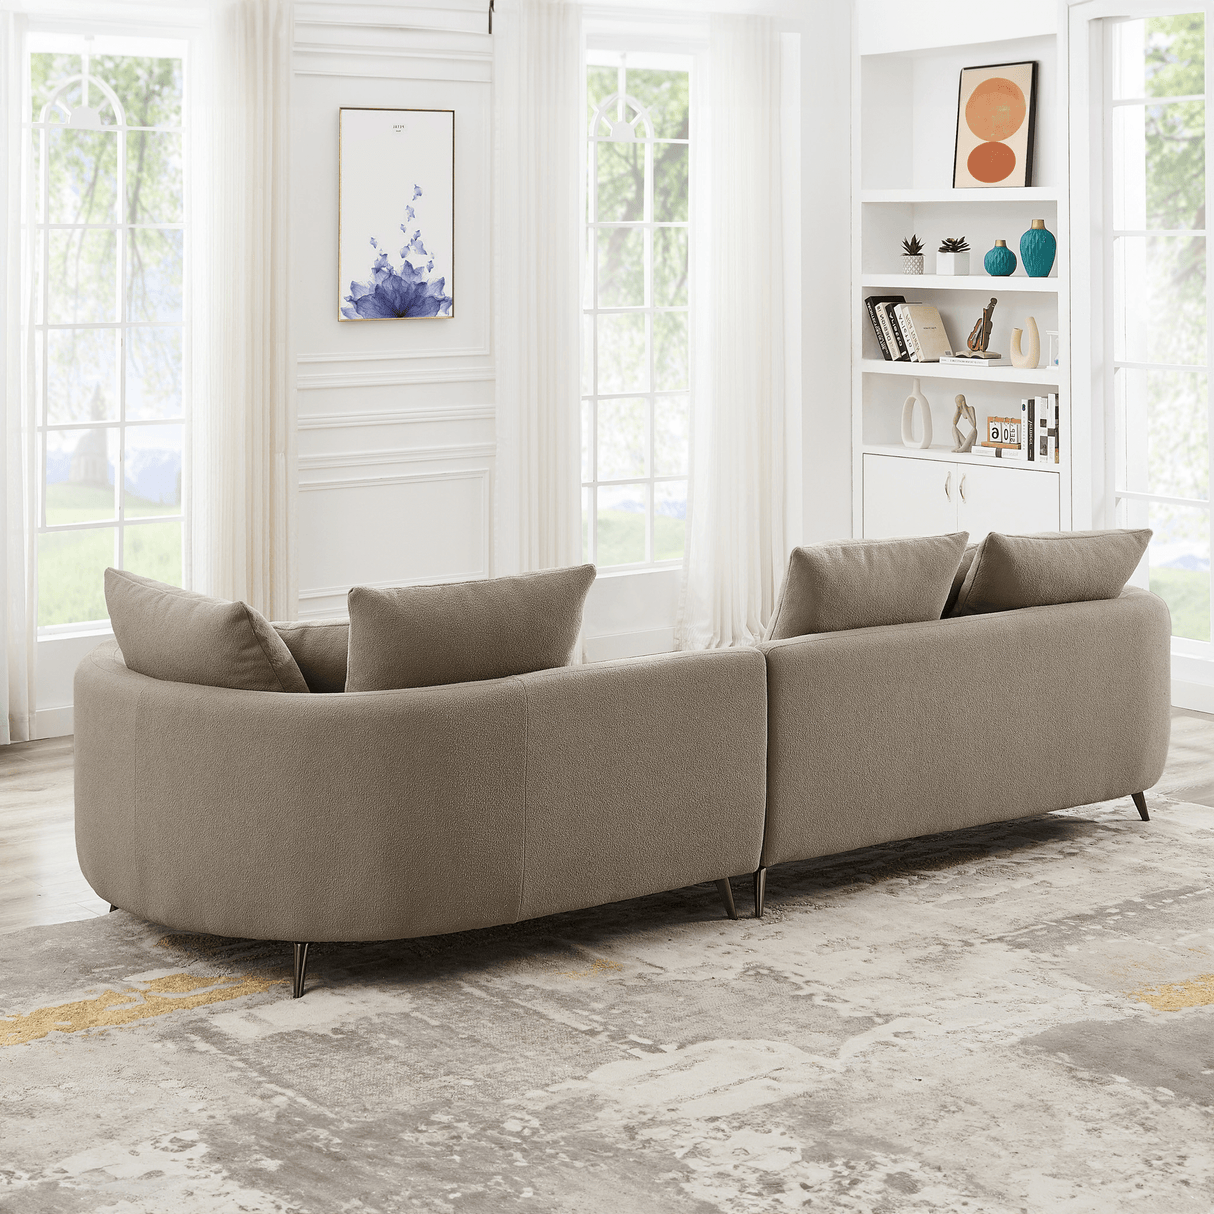 McKenzie Mid-century Modern Boucle Sectional Sofa Ivory / Right - AFC01863 - Luna Furniture